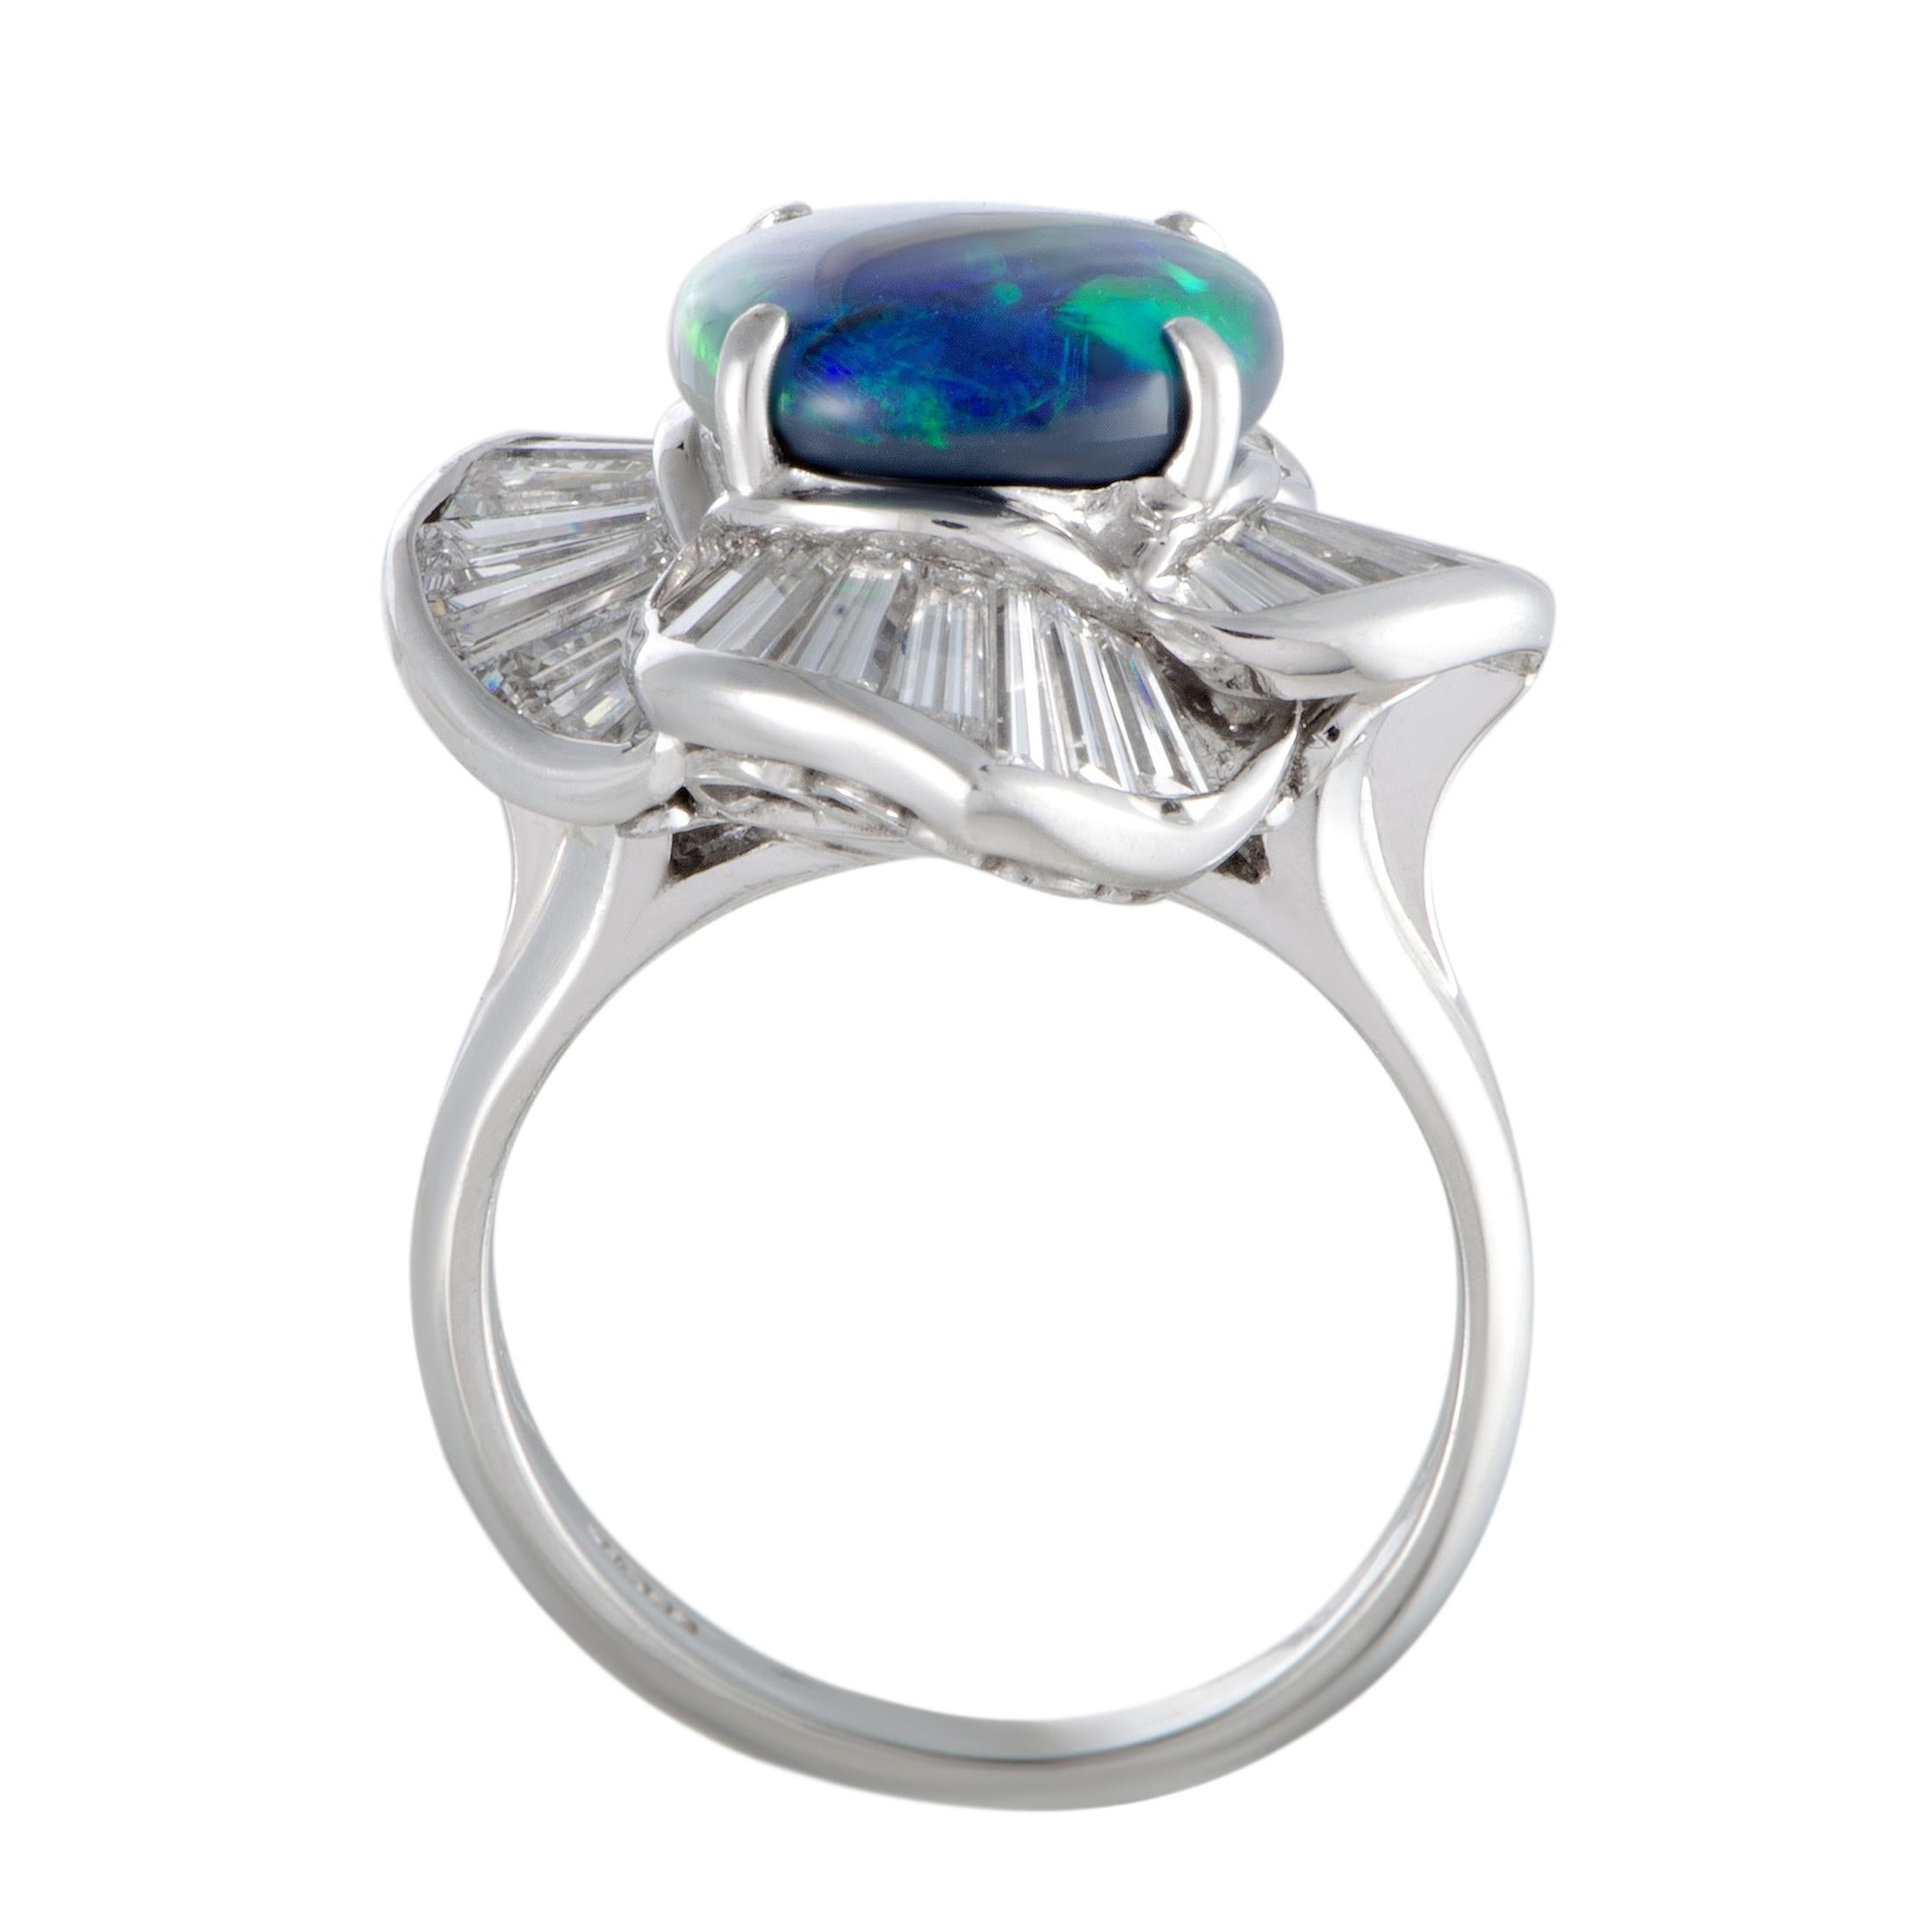 This exceptional ring is presented with a splendidly elegant design and majestic gemstone décor. Beautifully made of luxurious platinum, the ring is set with 2.69 carats of diamonds and with an eye-catching opal that weighs 3.75 carats.
Ring Top